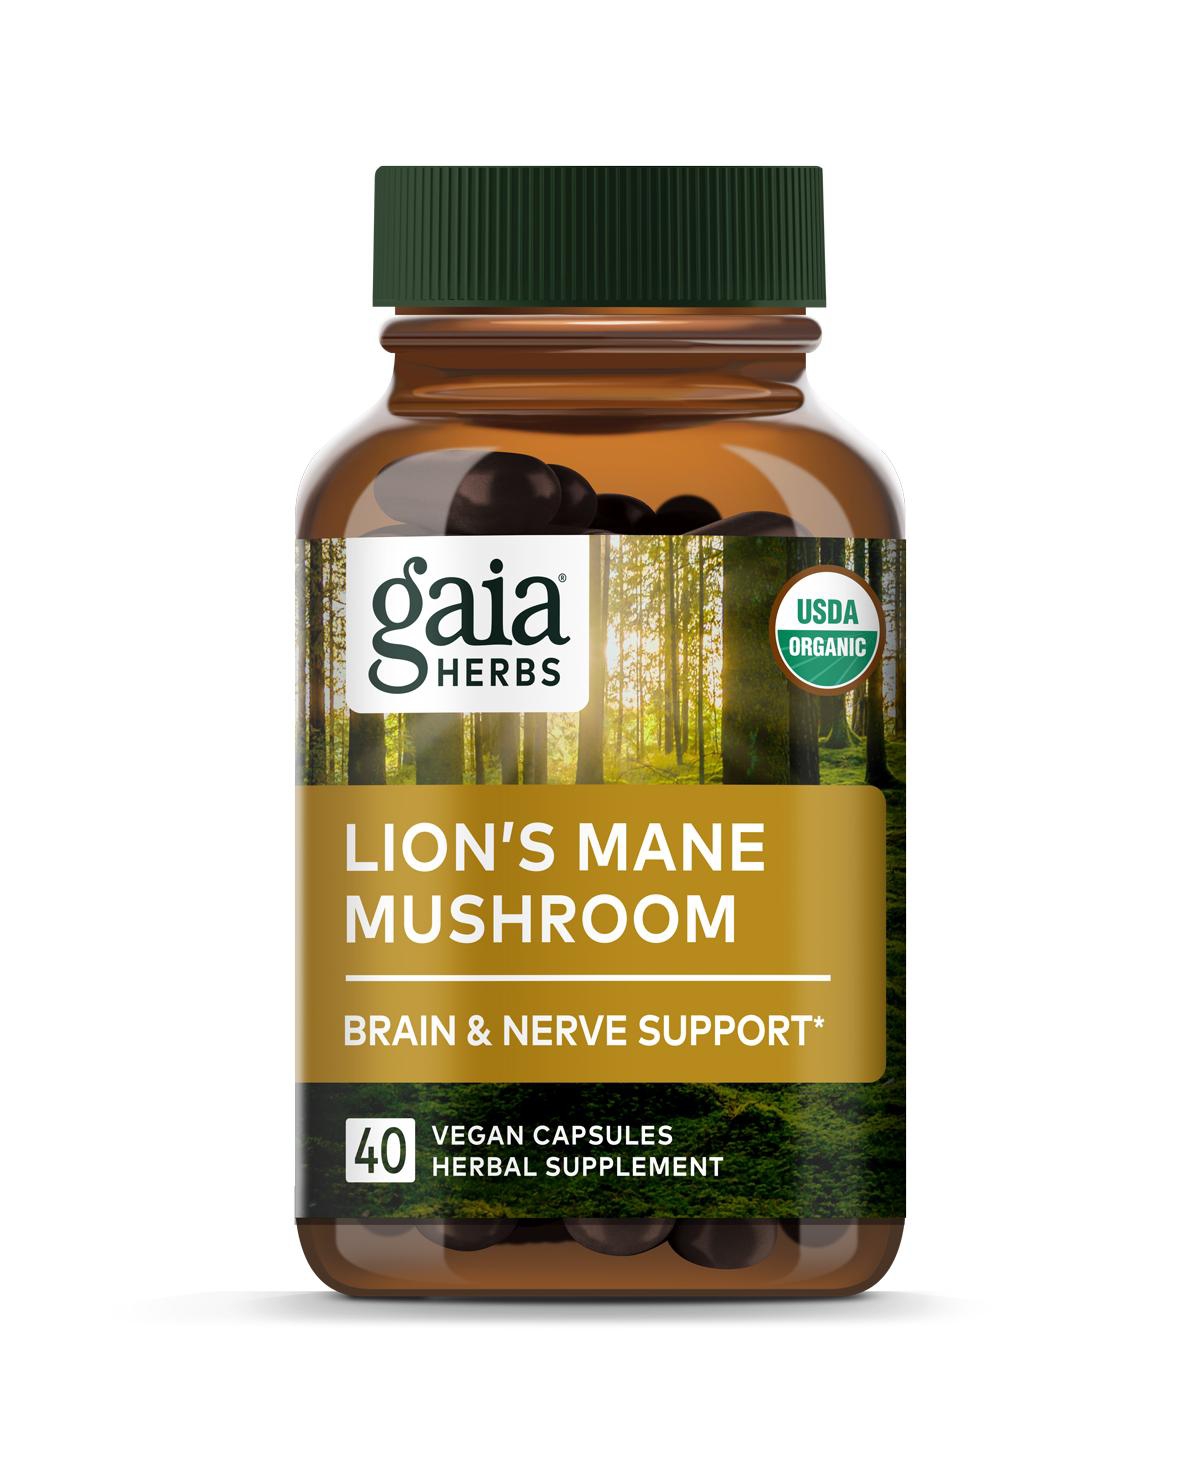 Organic Lion's Mane Mushroom - Brain and Nerve Support Supplement to Help Maintain Neurological Health - with Organic Lion's Mane Mushrooms